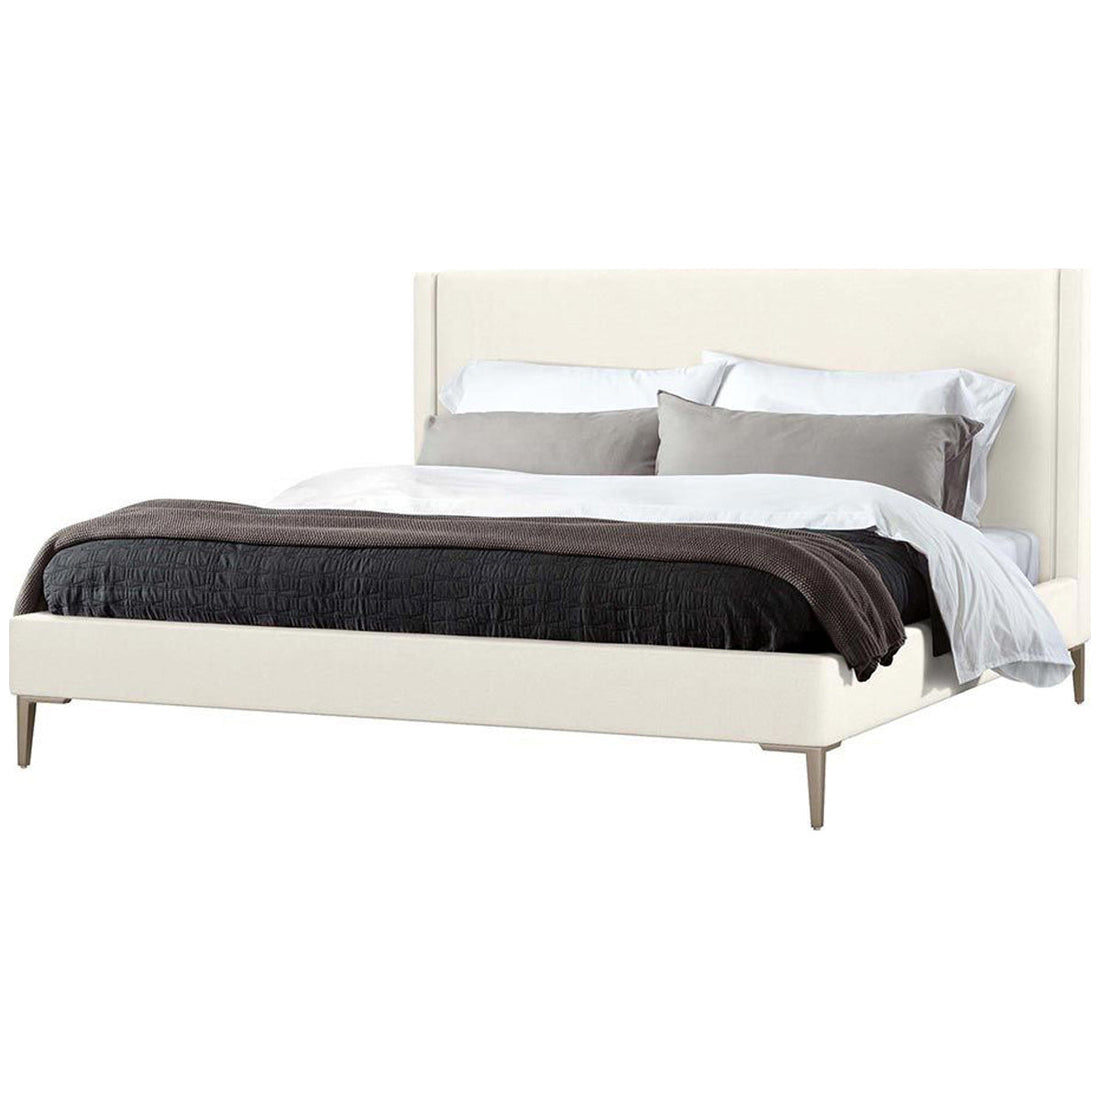 Interlude Home Izzy Bay Crest Bed - Pure